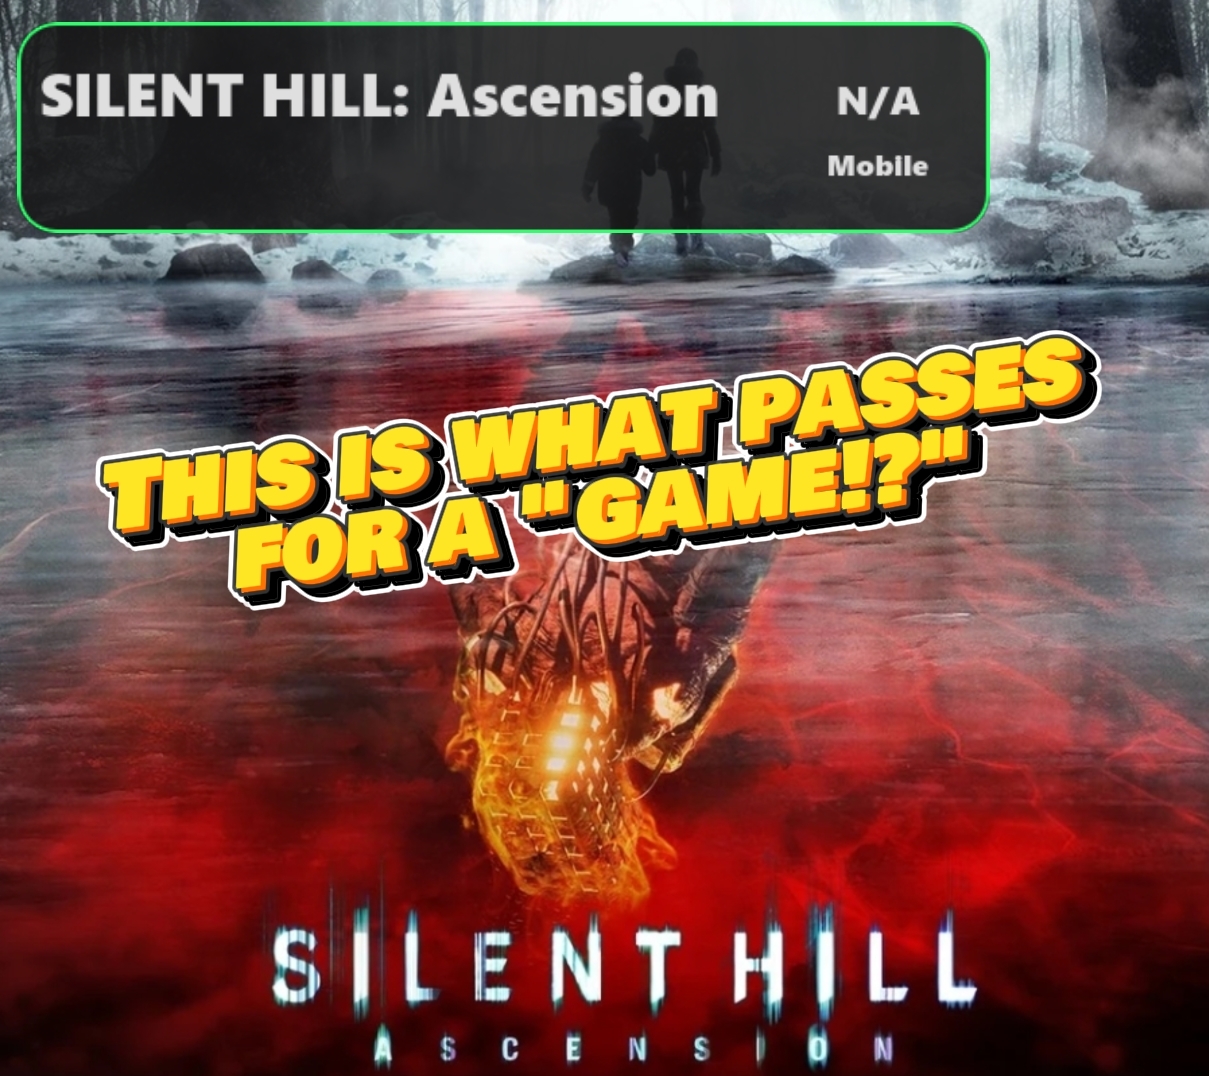 Do you think Silent Hill: Ascension will be the only Silent Hill